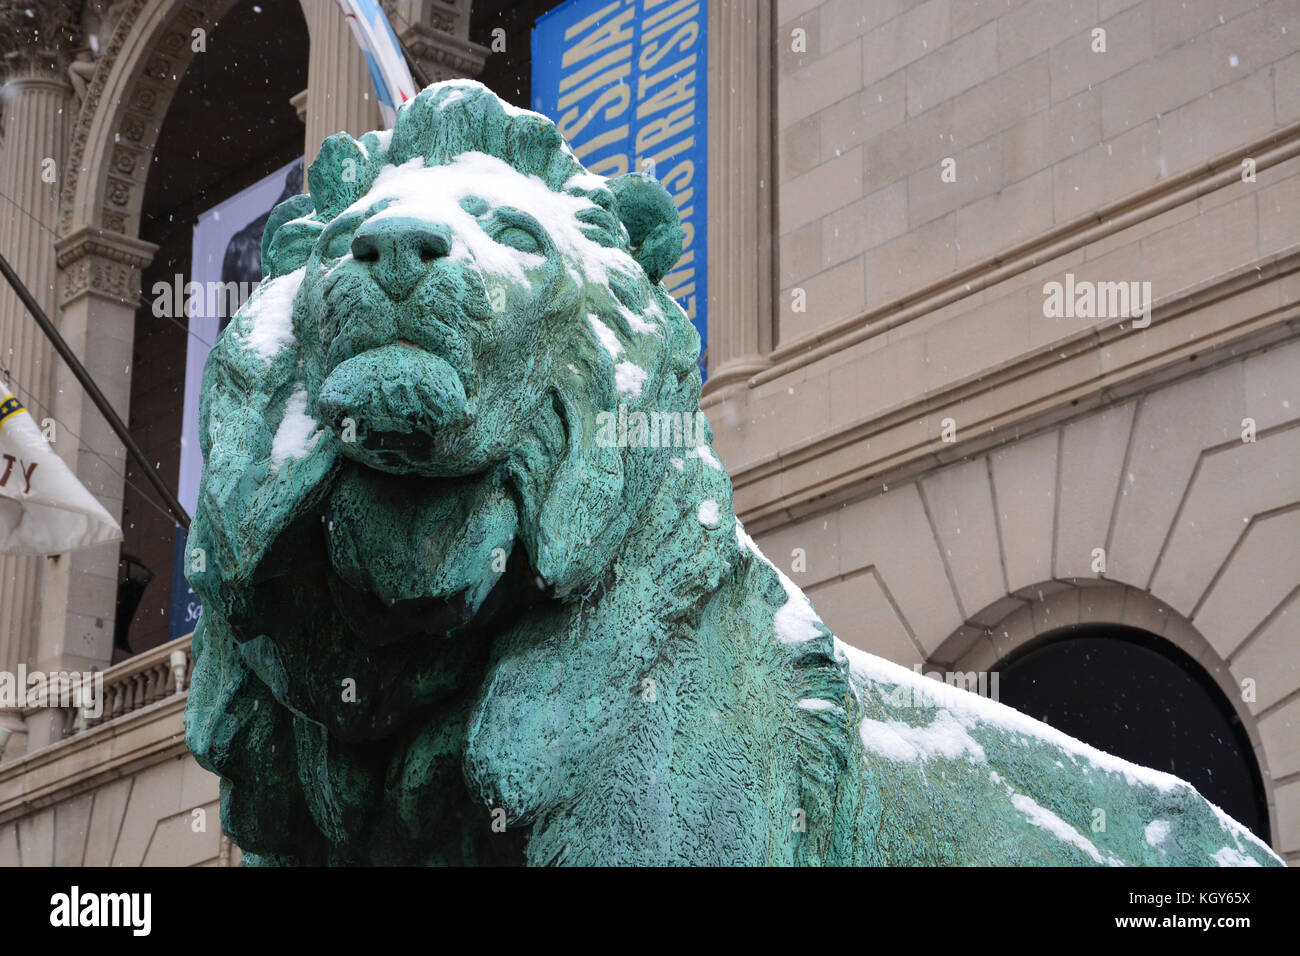 The iconic lions in front of the Art Institute of Chicago's Michigan Ave. entrance are covered with a light dusting of snow. Stock Photo